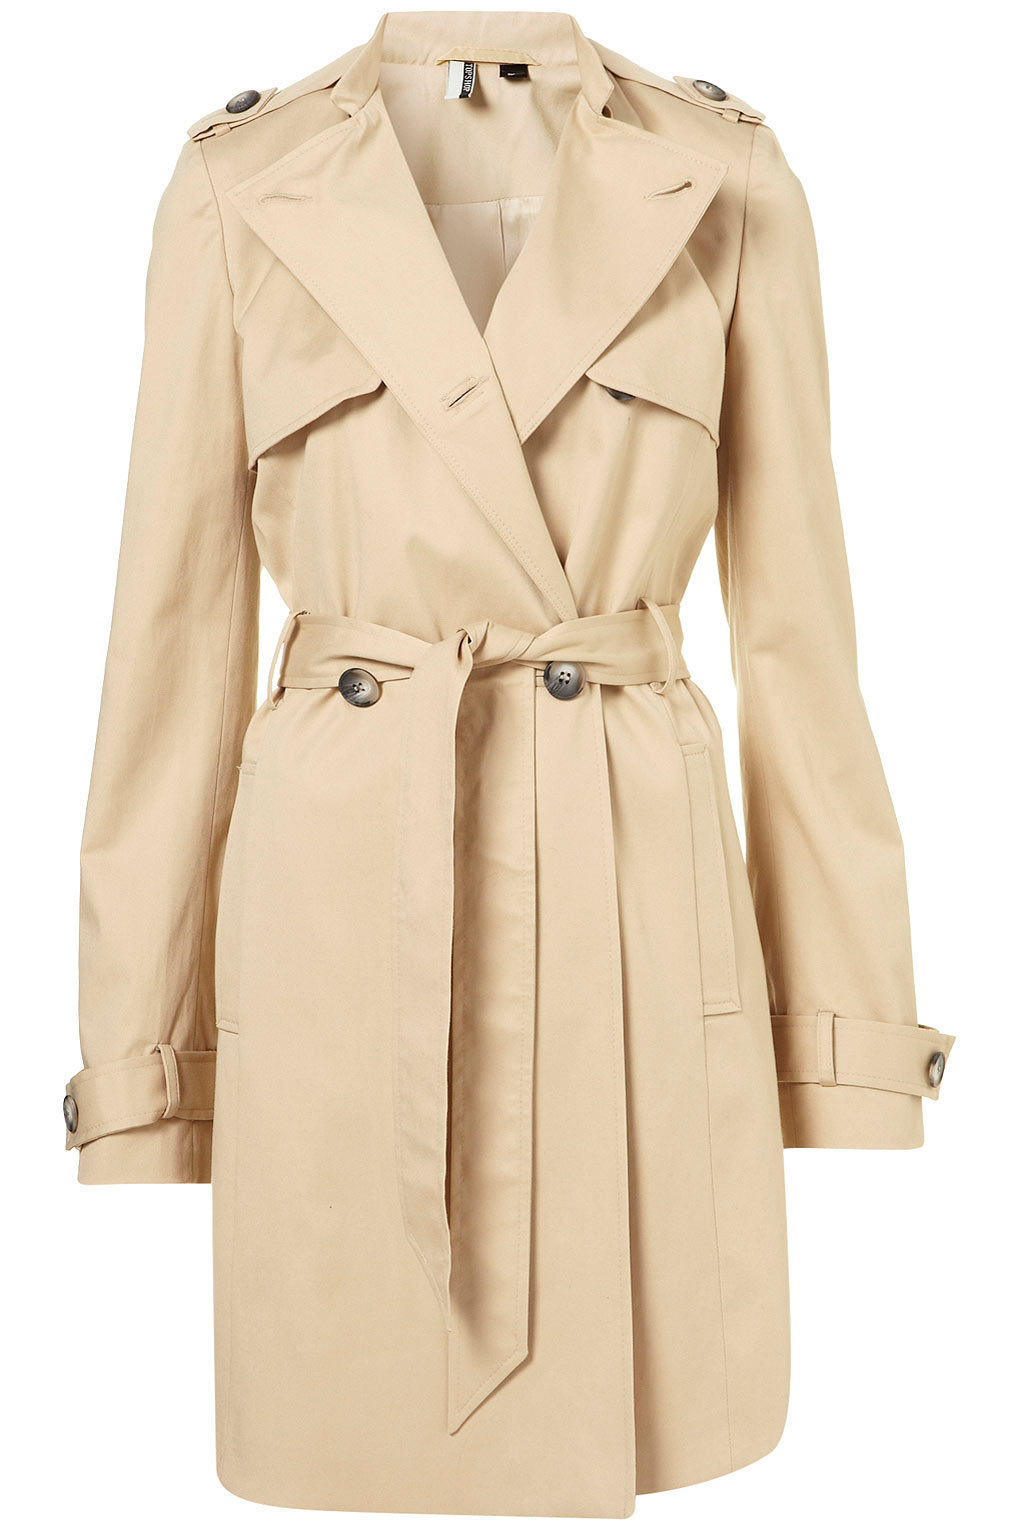 Topshop Premium Leather Collar Trench in Natural | Lyst